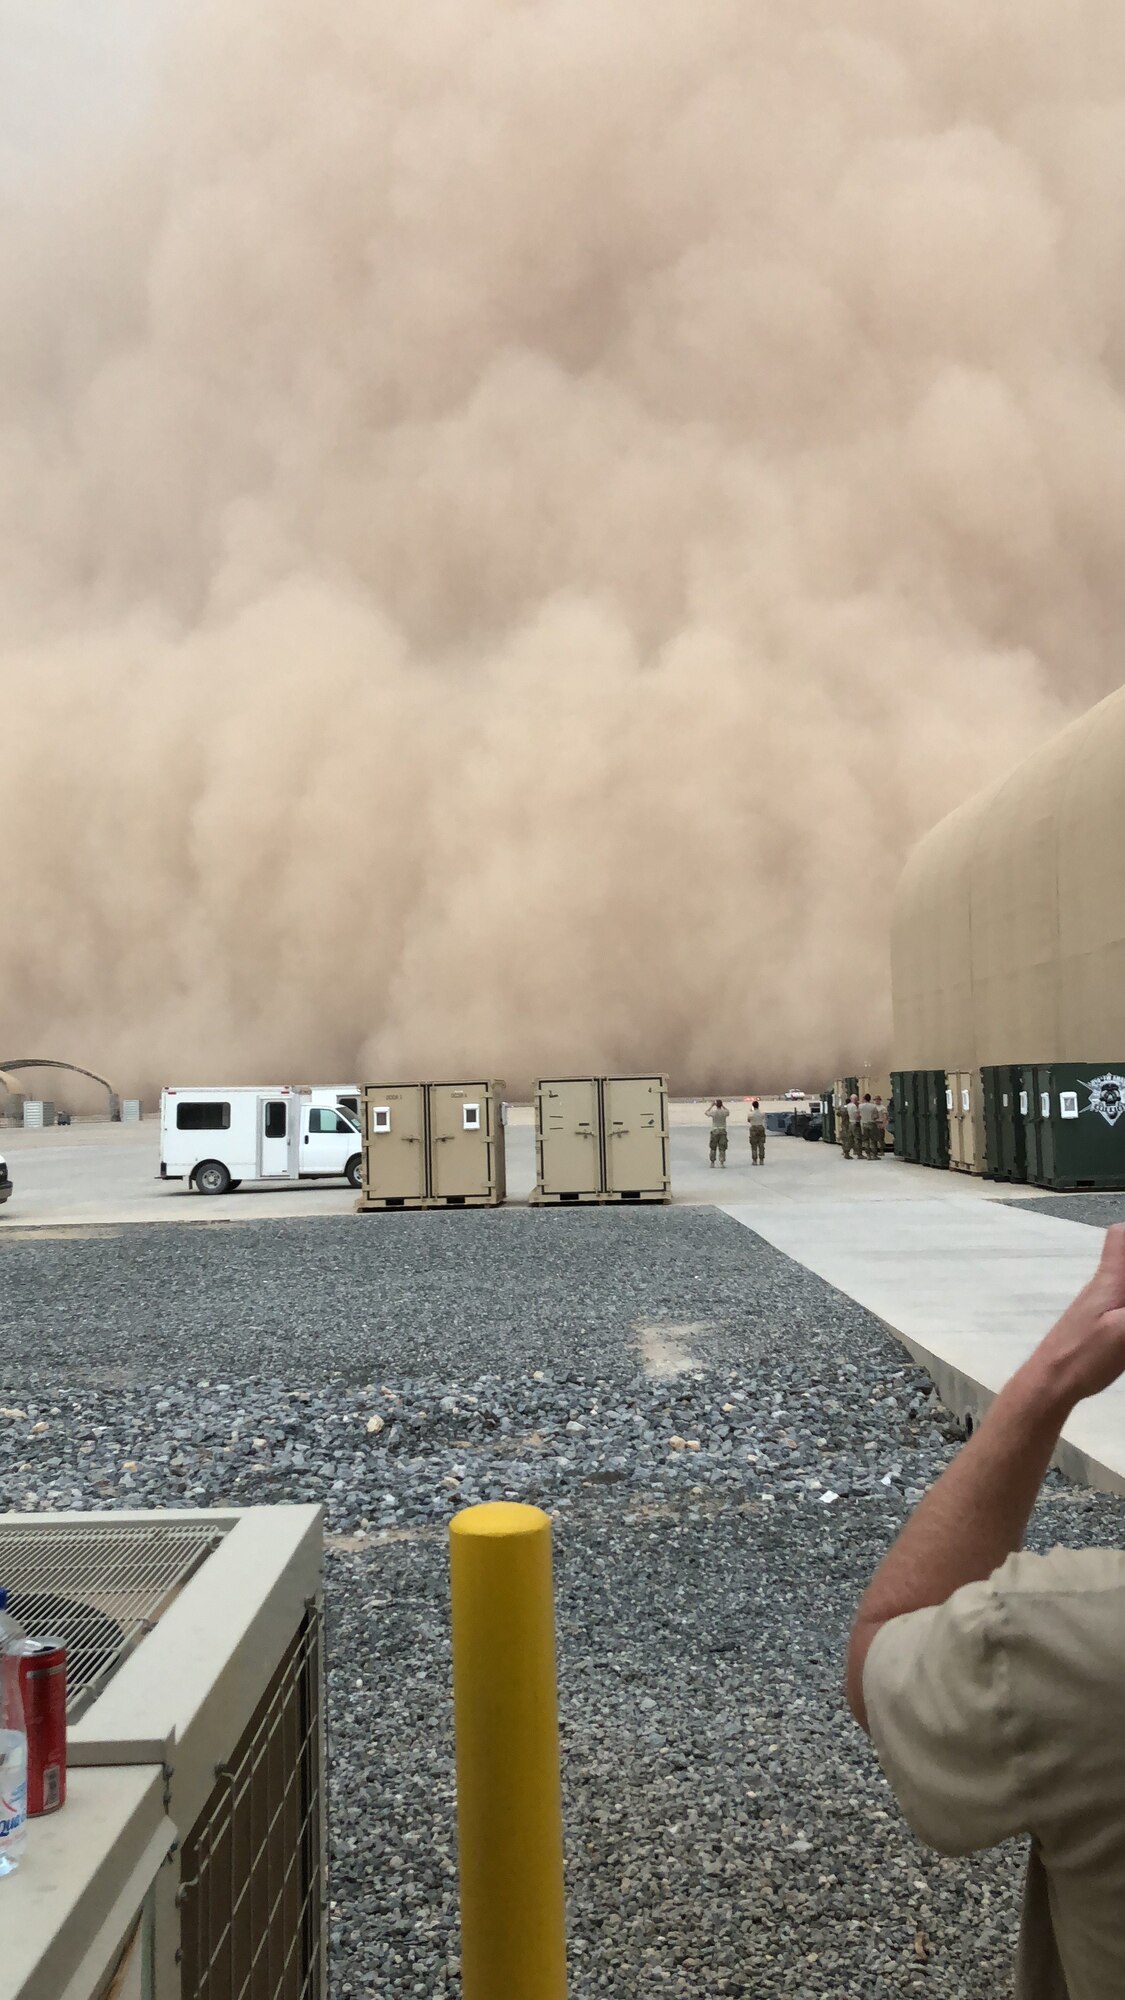 A dust storm approaches the work areas of deployed Airmen at the 407th Air Expeditionary Group, Ahmad al-Jaber Air Base, Kuwait in 2018. (Courtesy photo from Chief Master Sgt. Ryan Gigliotti)